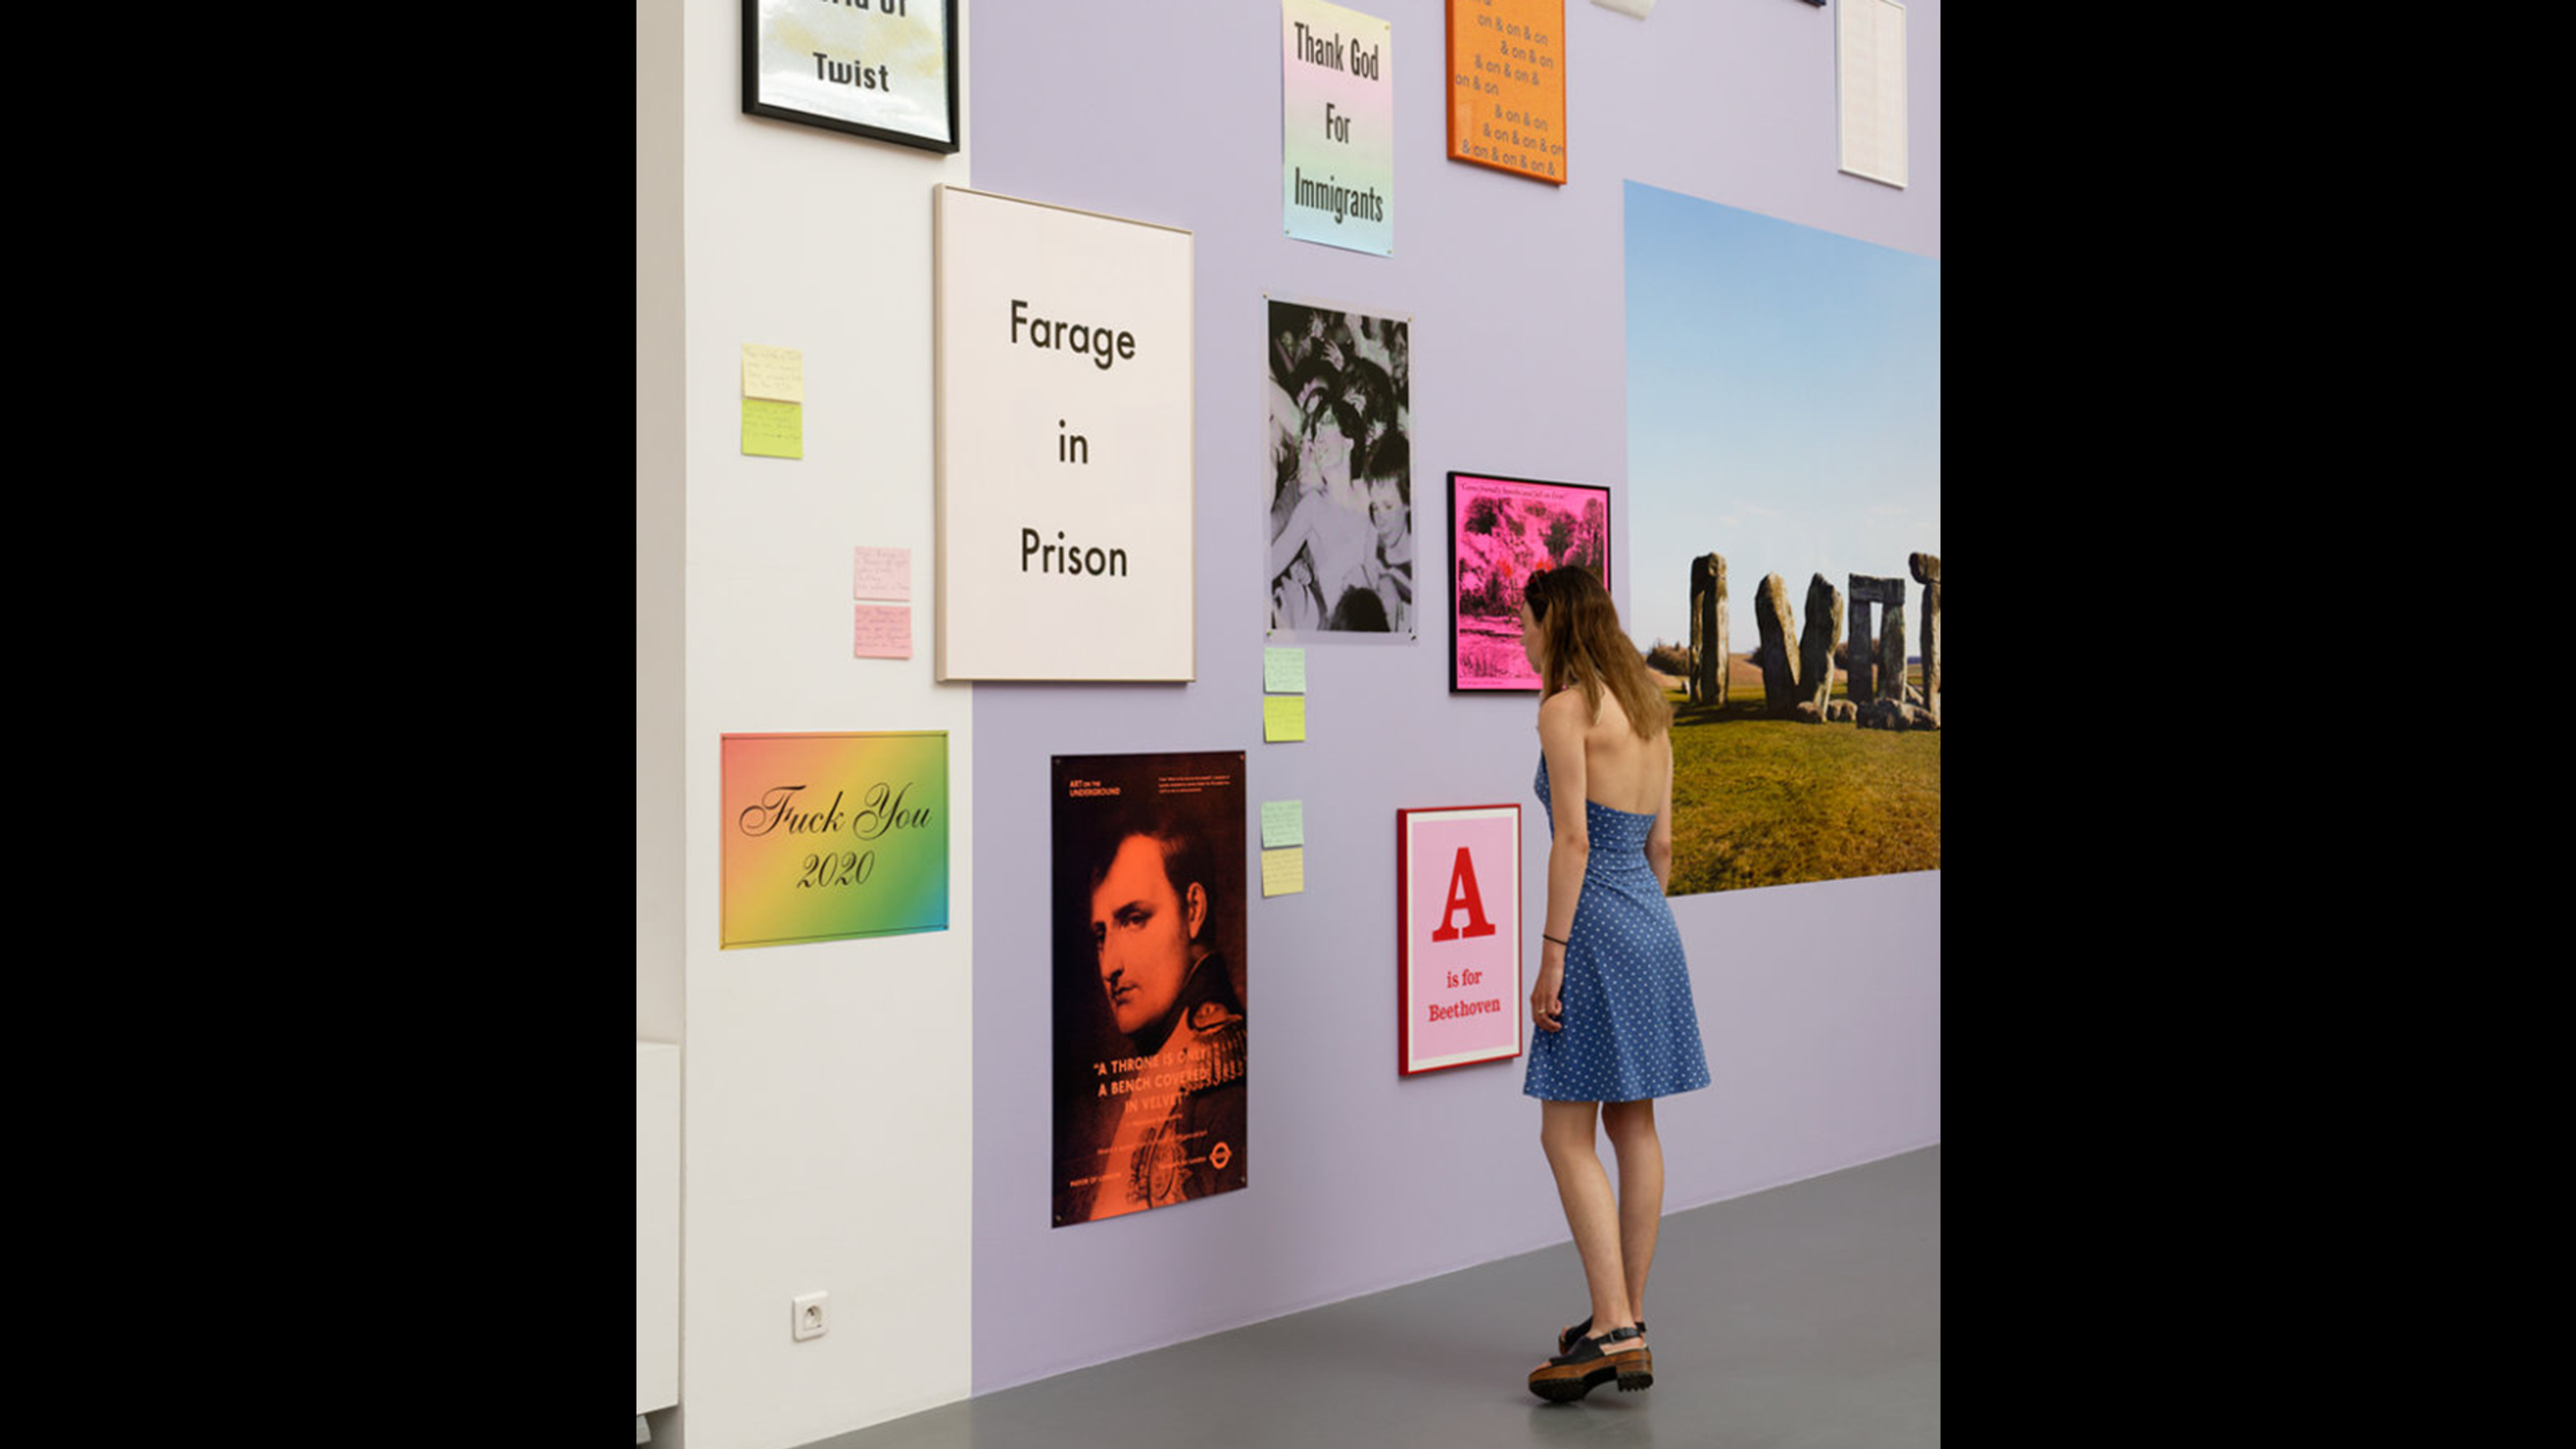 A person in a dress stands looking at poster artwork by Jeremy Deller